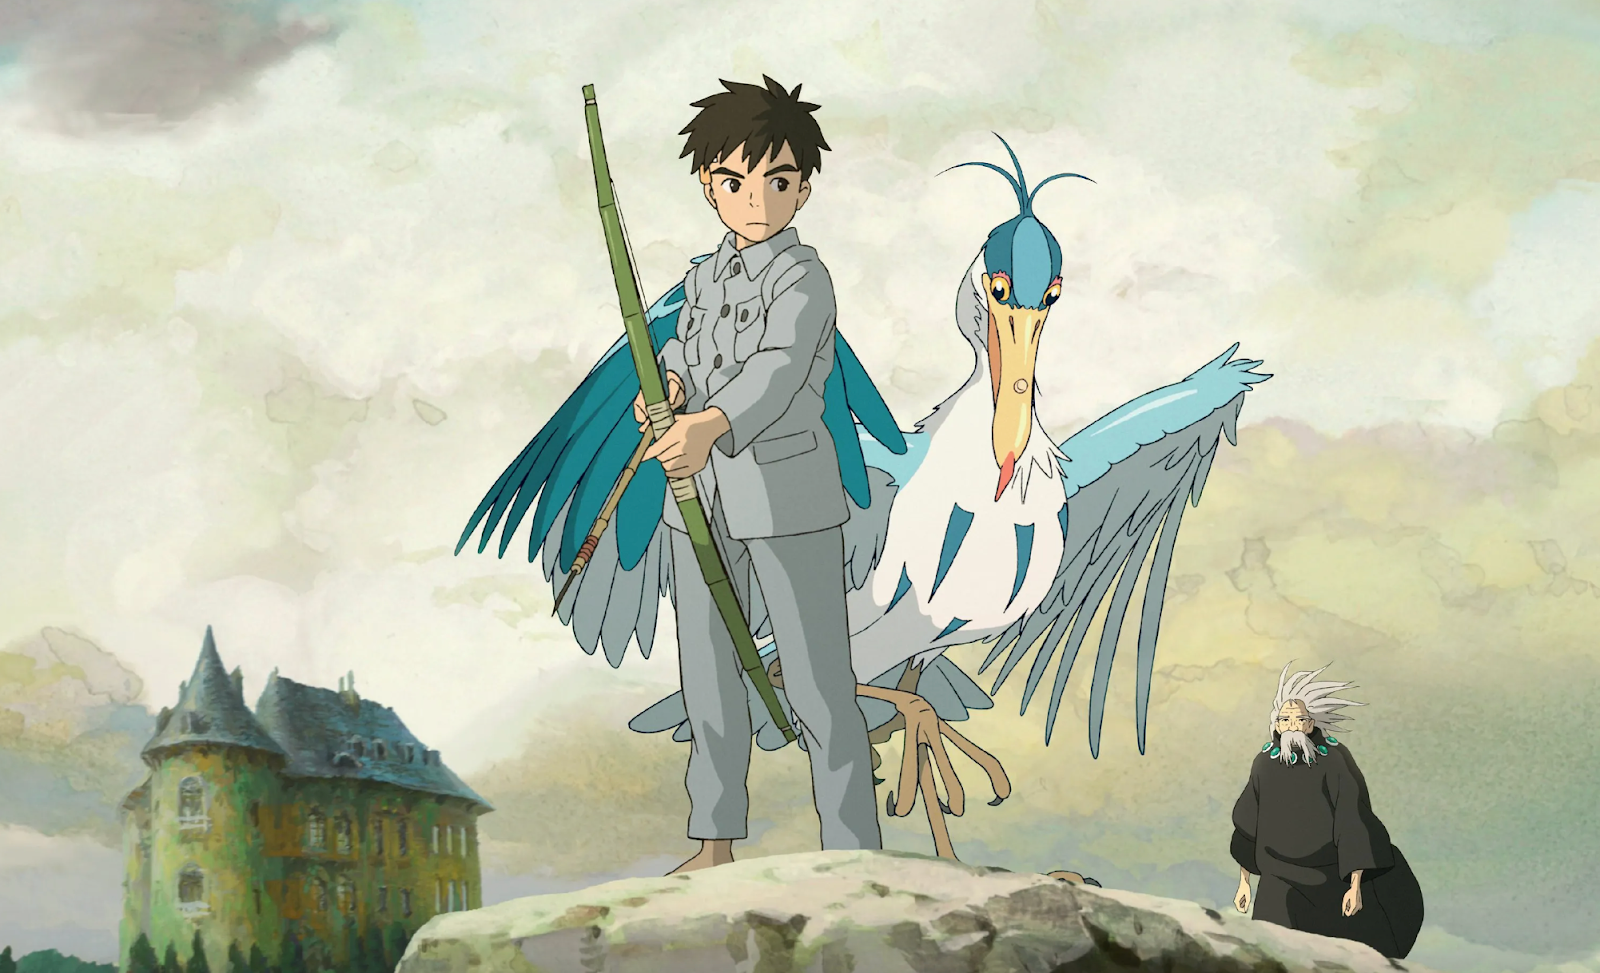 With 'The Boy and the Heron,' Hayao Miyazaki Dreams Once More